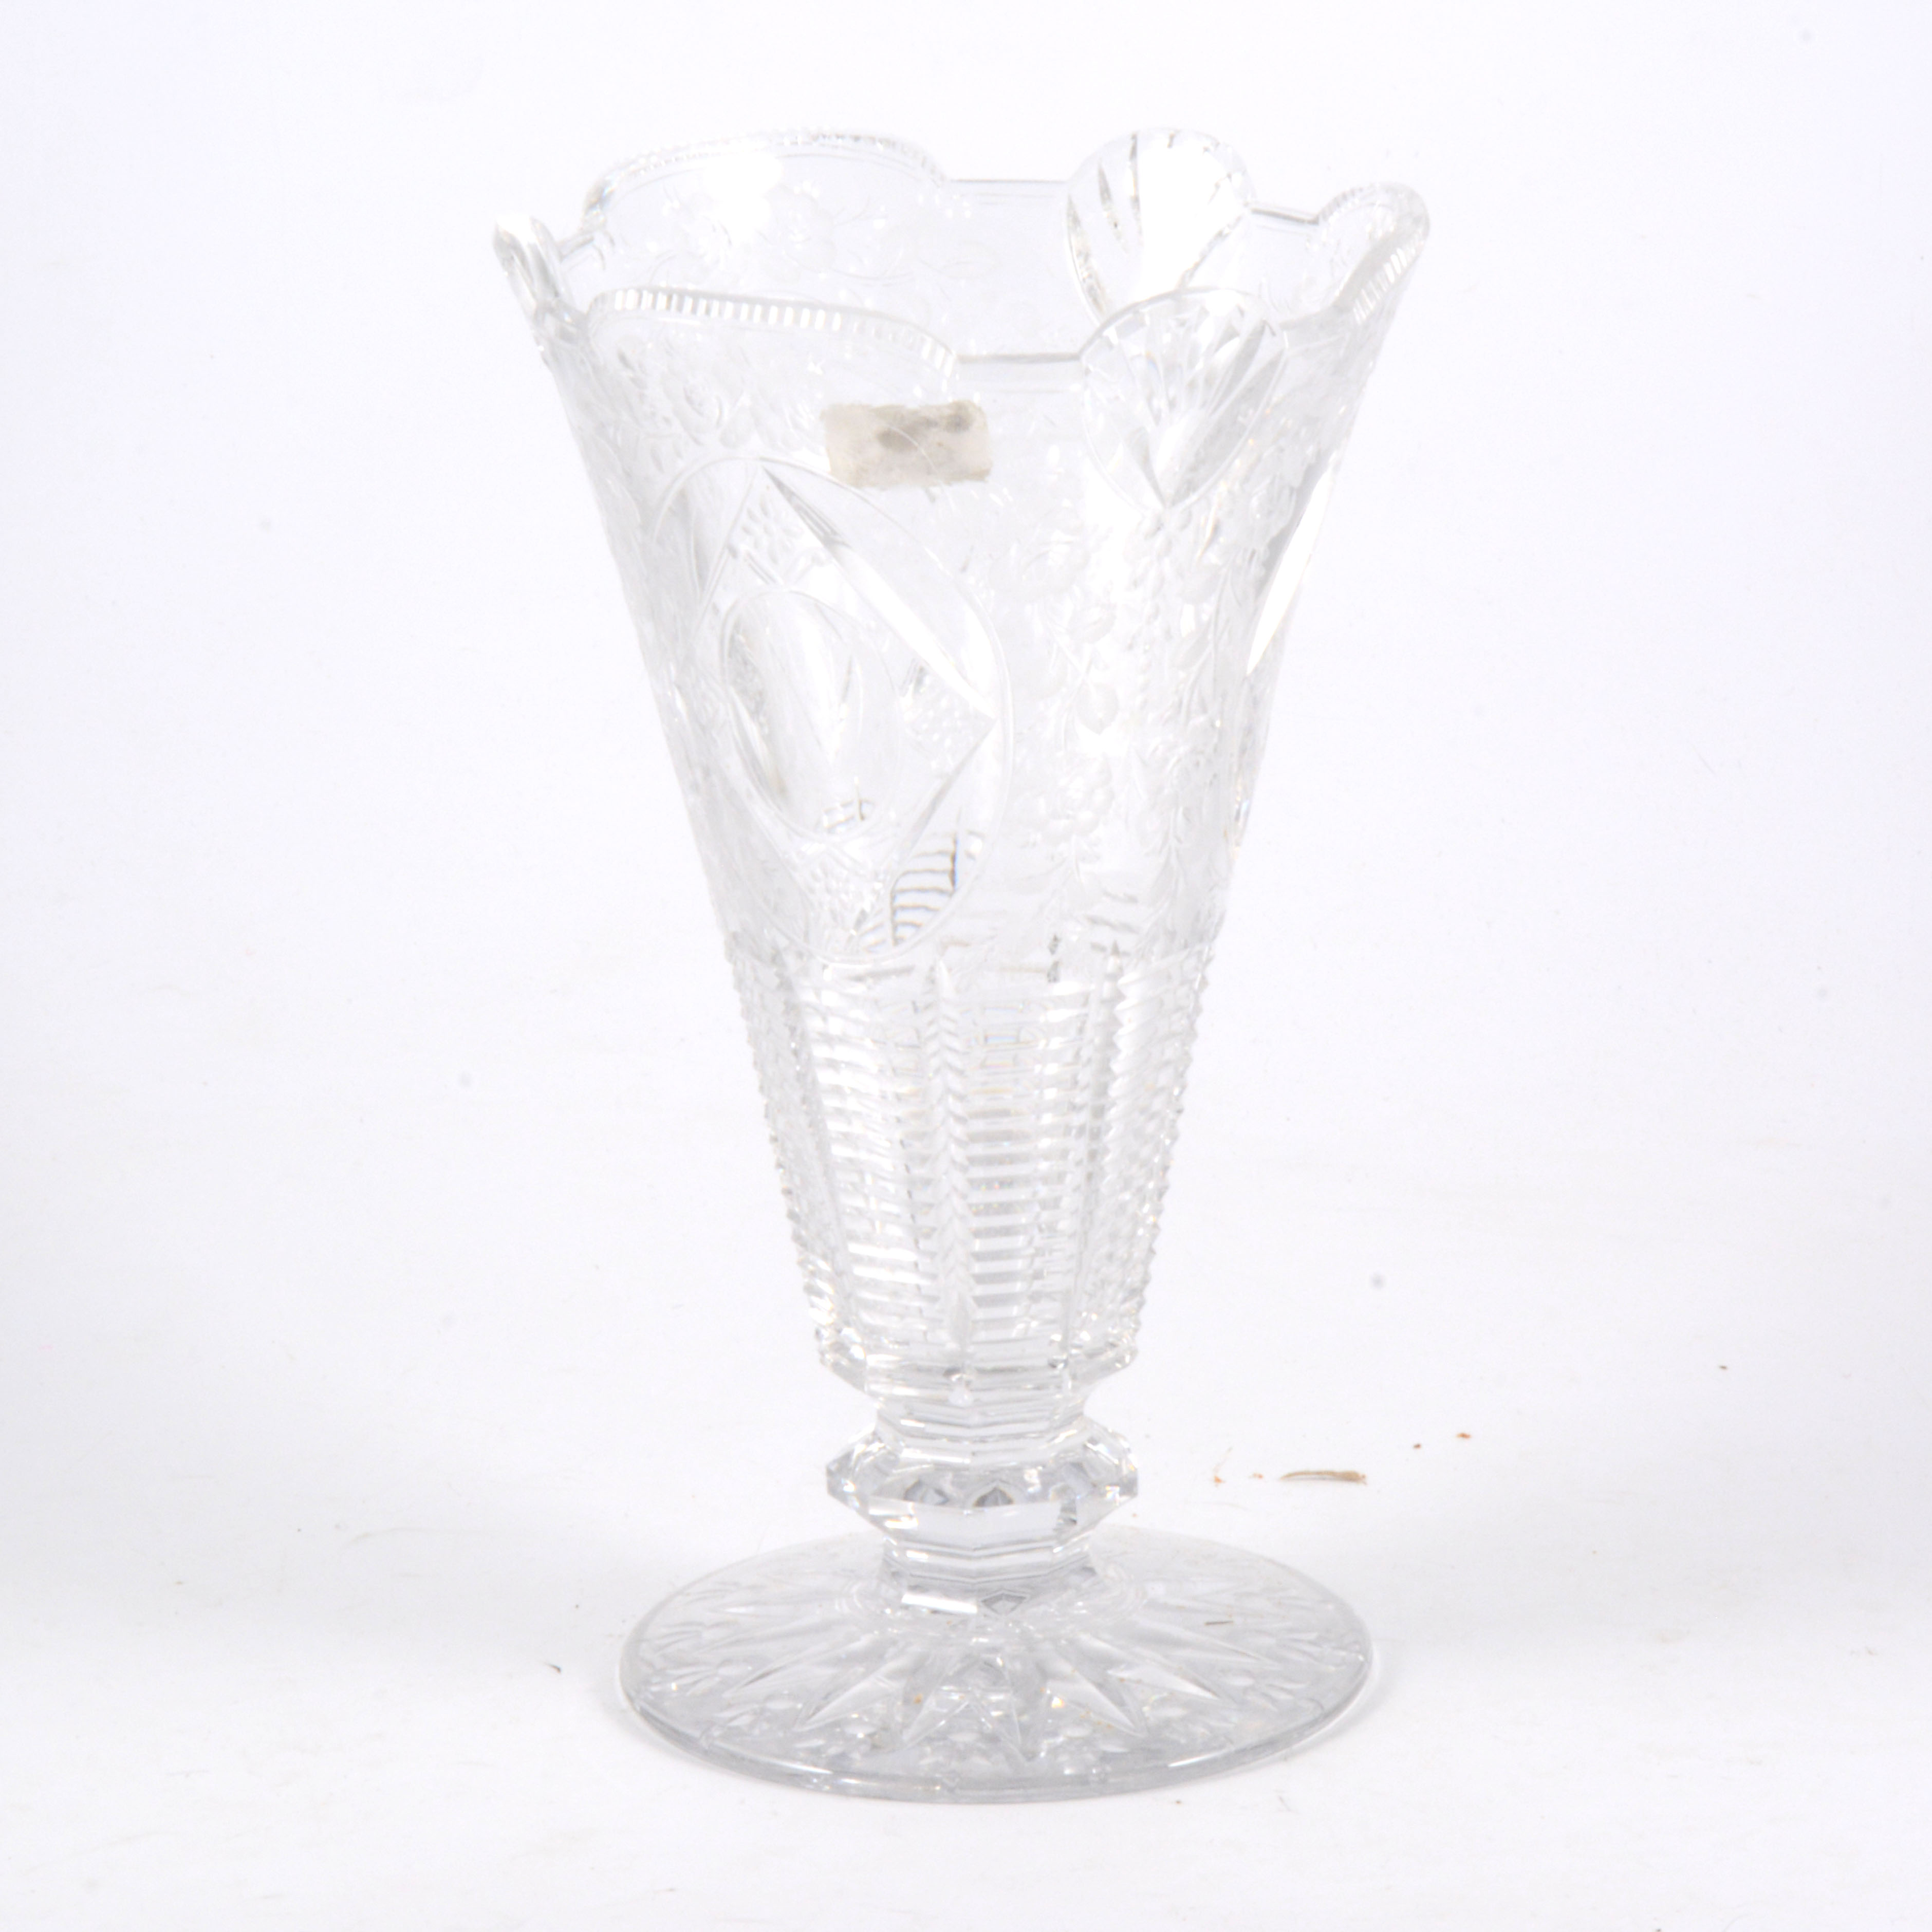 Fine quality cut-glass trumpet shaped vase, by Royal Tudor, cut and engraved decoration, 32cm.